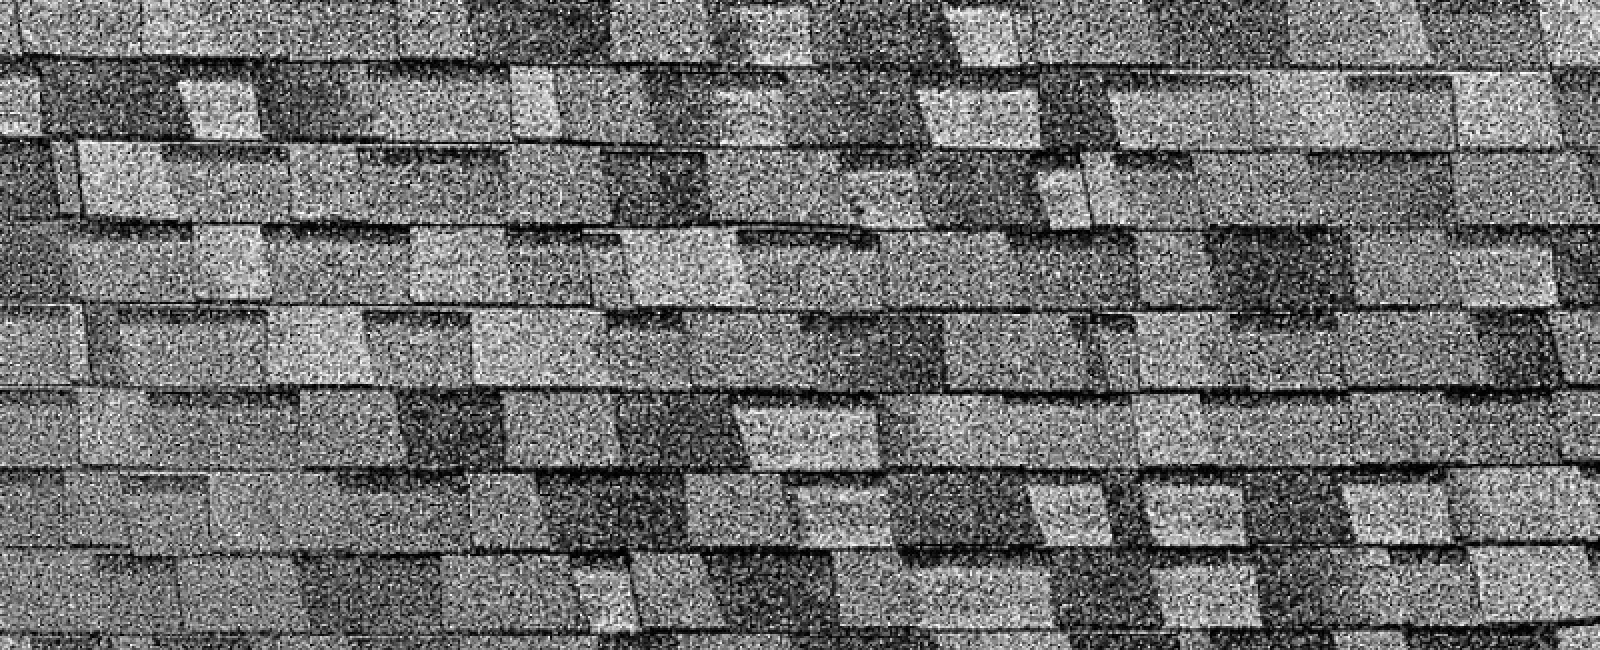 Roofing Color Selection Means More Than You Think